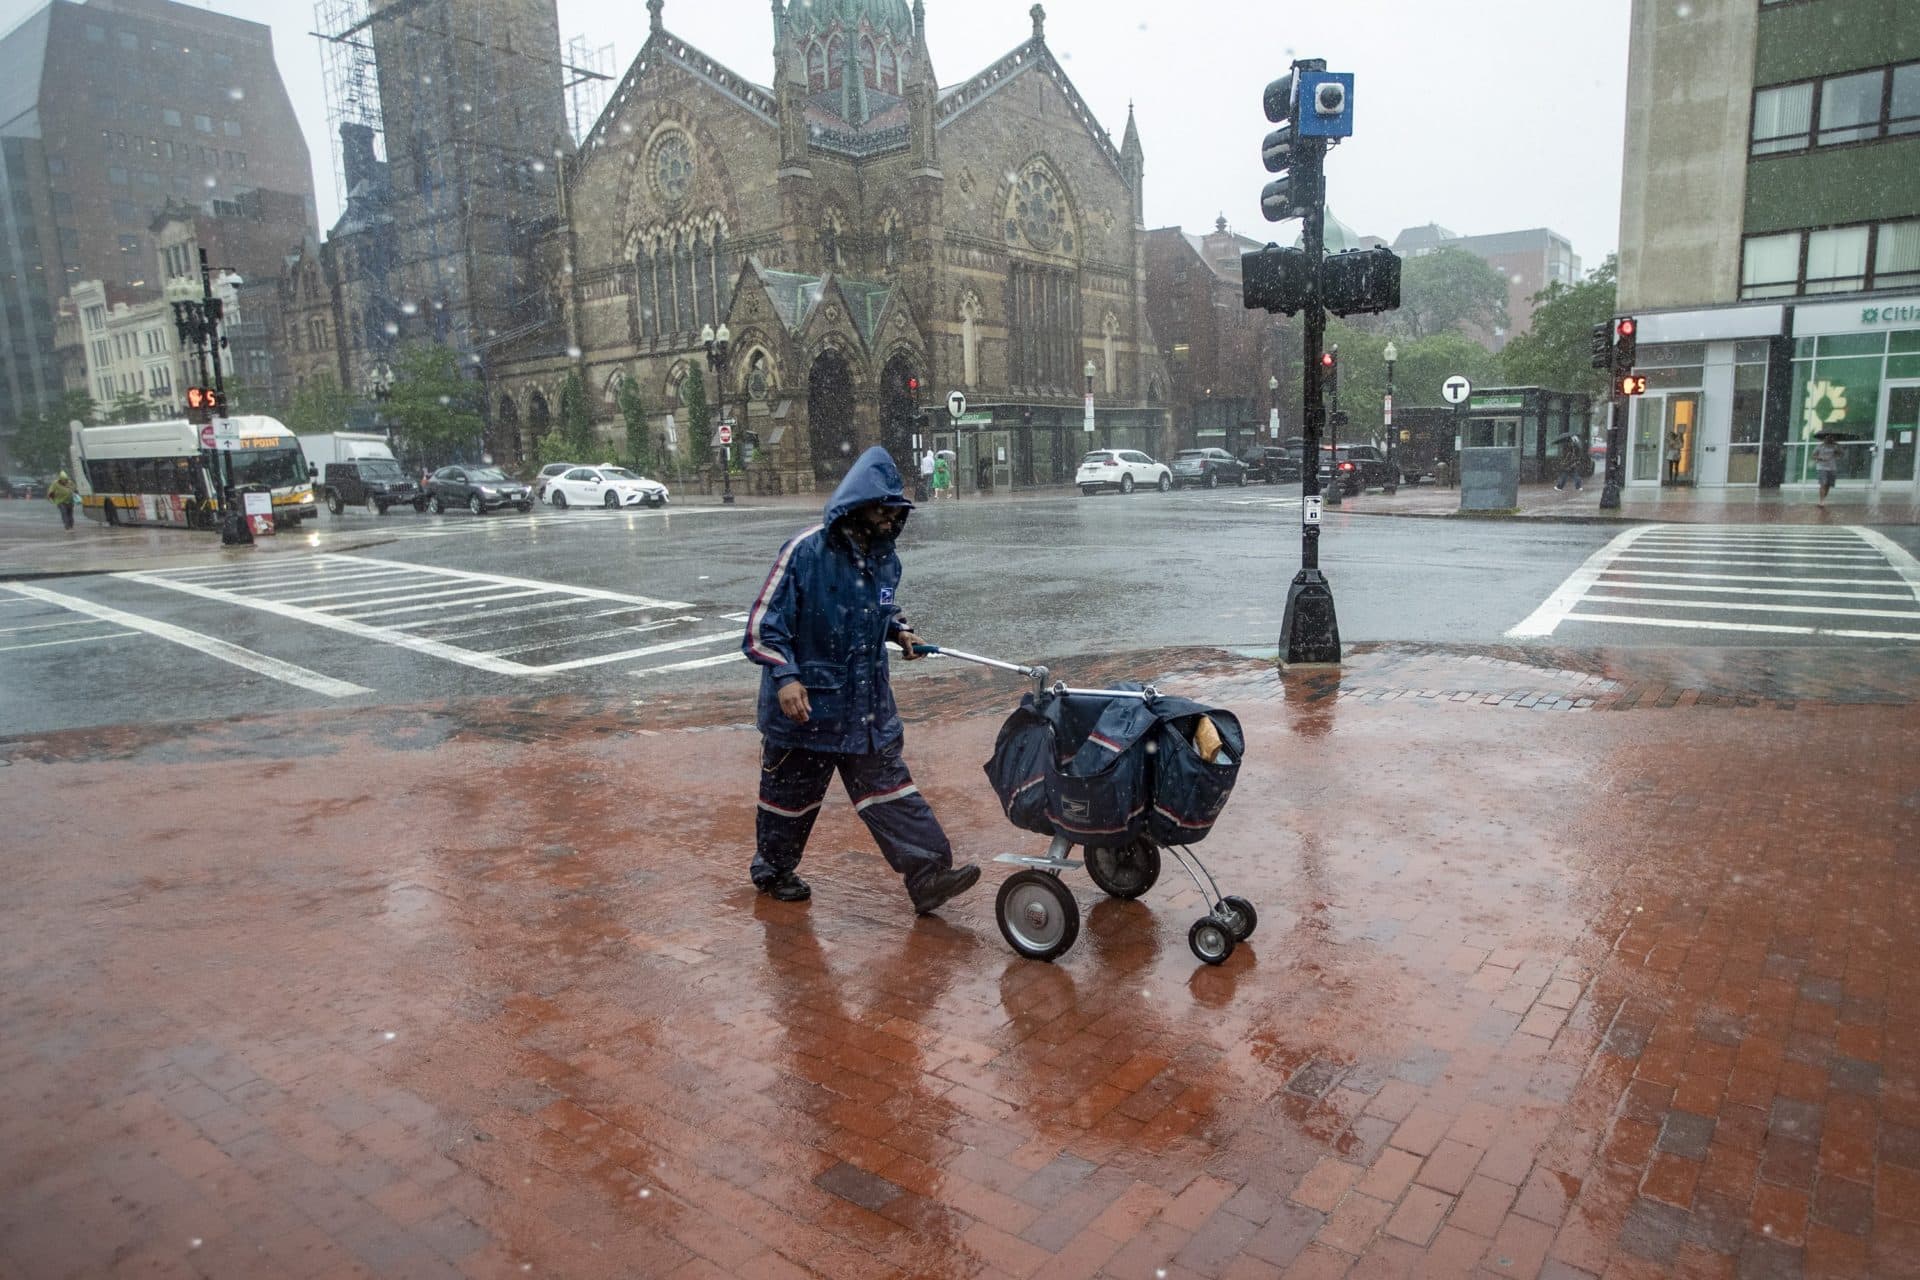 A mail carrier walks through the heavy rain in Copley Square during Tropical Storm Elsa. (Jesse Costa/WBUR)